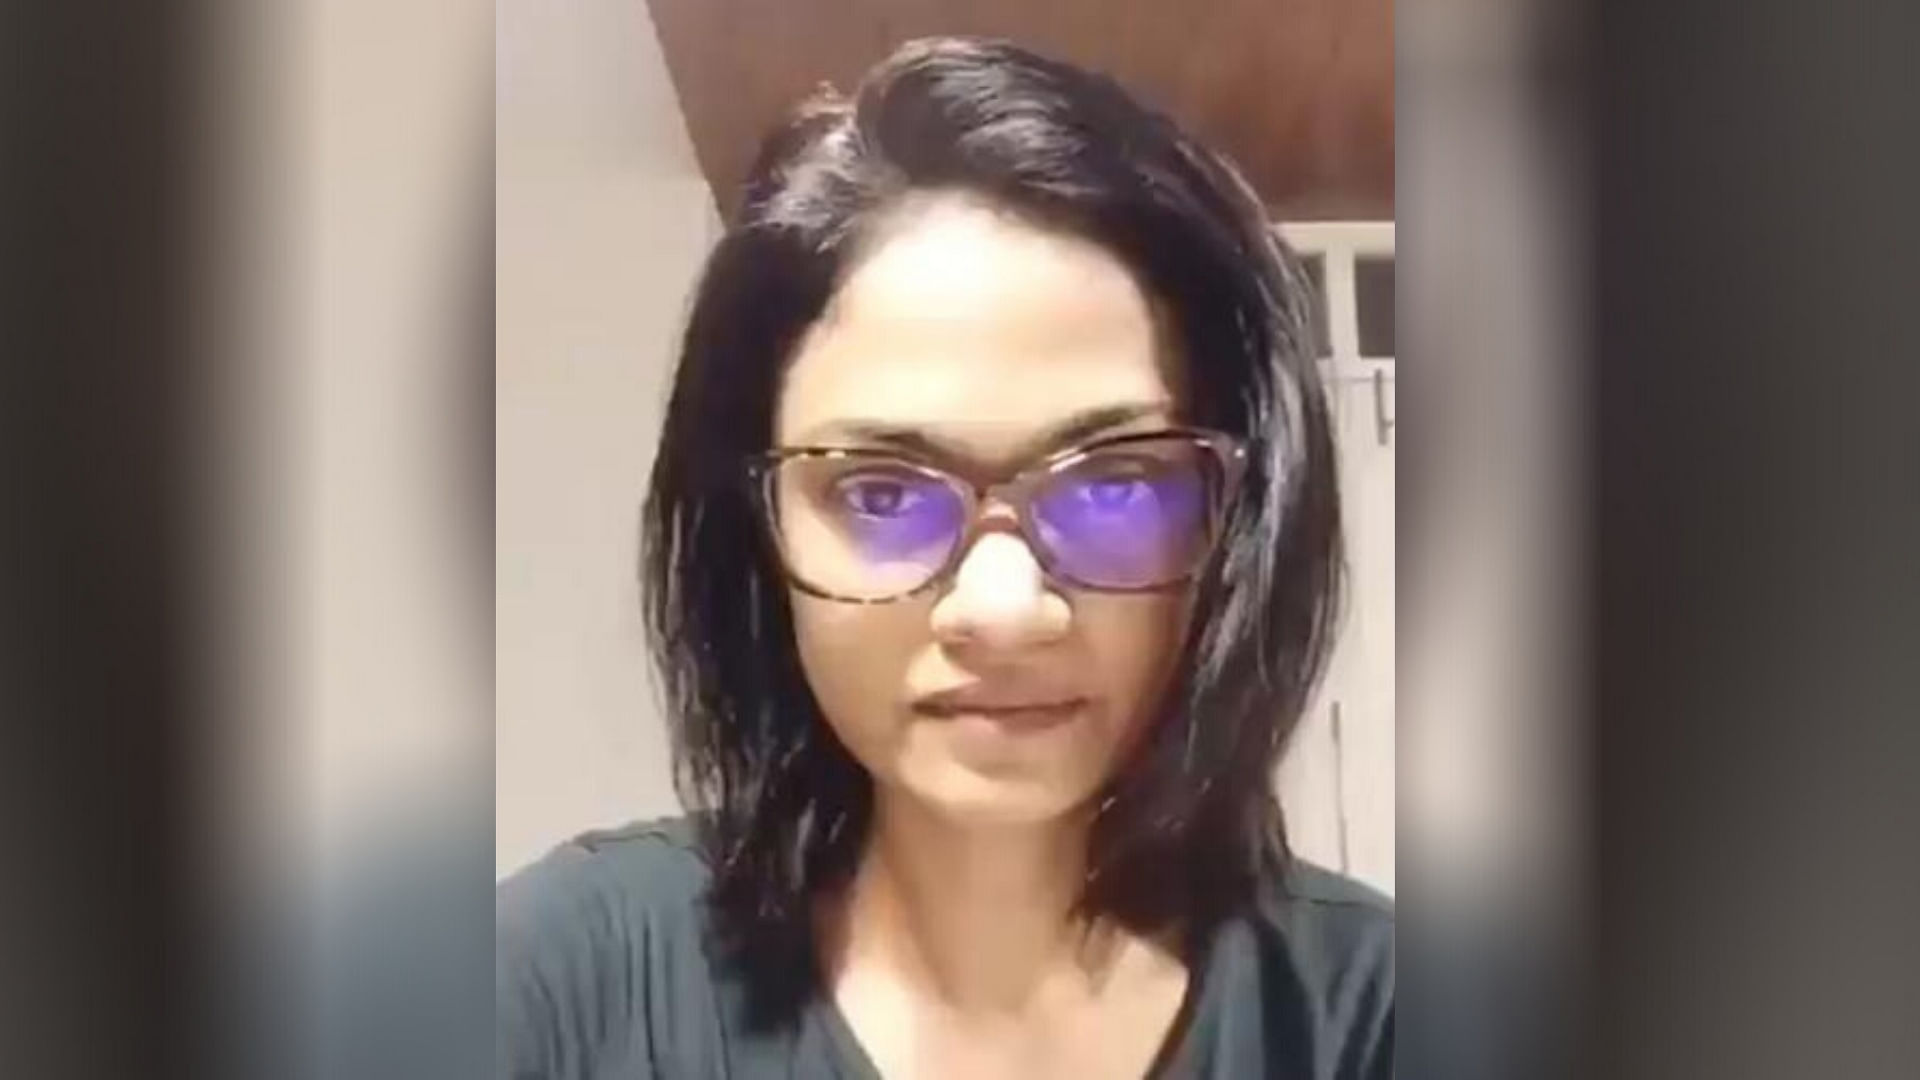 Tamil Nadu CB-CID, on Thursday, directed playback singer and radio jockey Suchitra to take down her video on the Sathankulam custodial deaths of Jeyaraj and Beniks. 